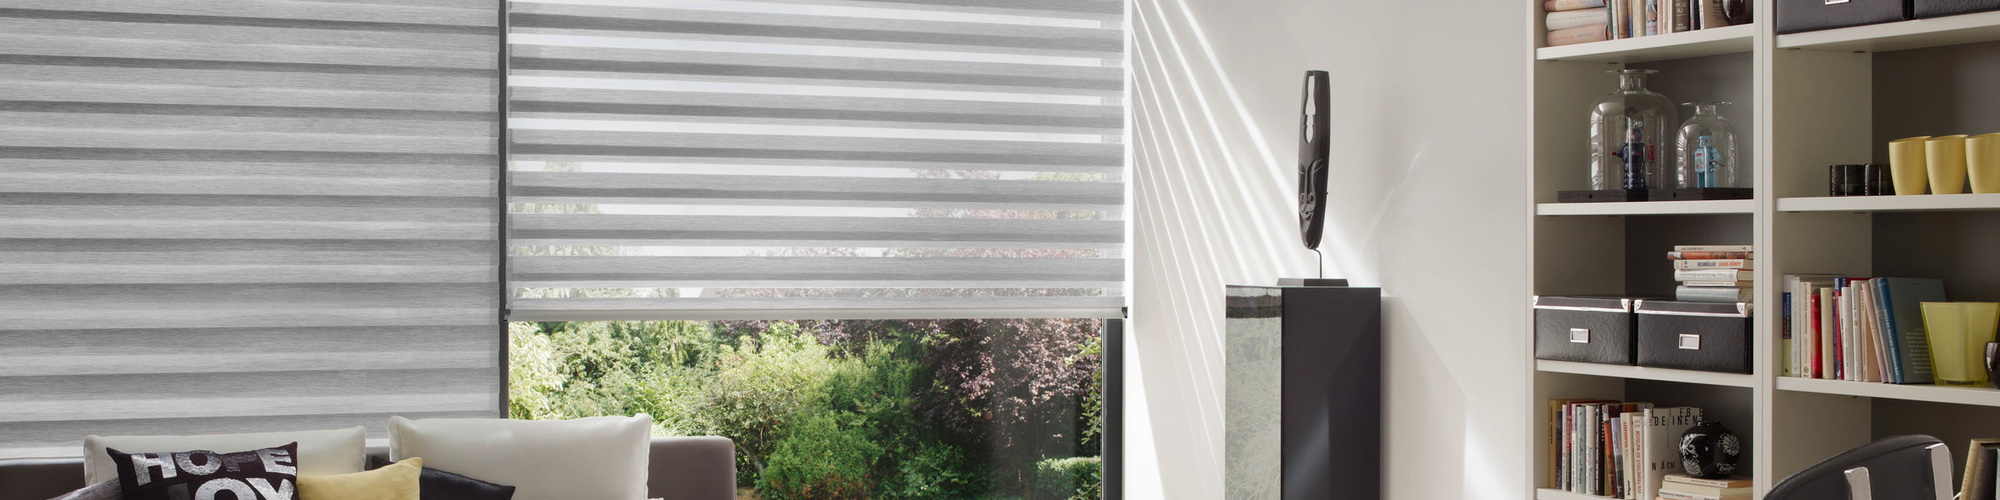 Example of the blinds available from Blind Revolution. Desktop image